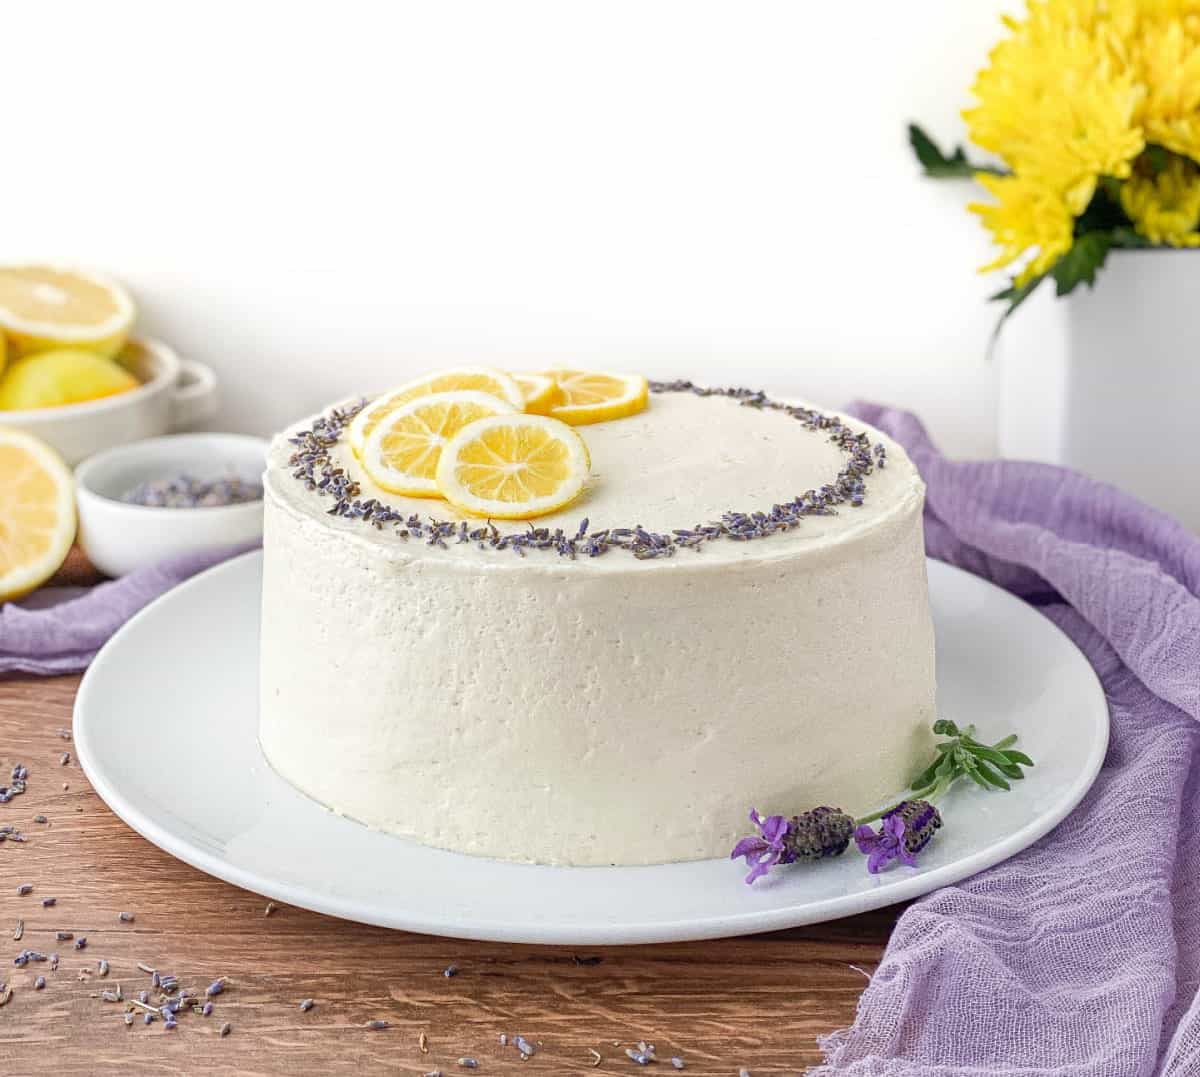 Lavender Lemon Cake with lavender flowers and lemons nearby.